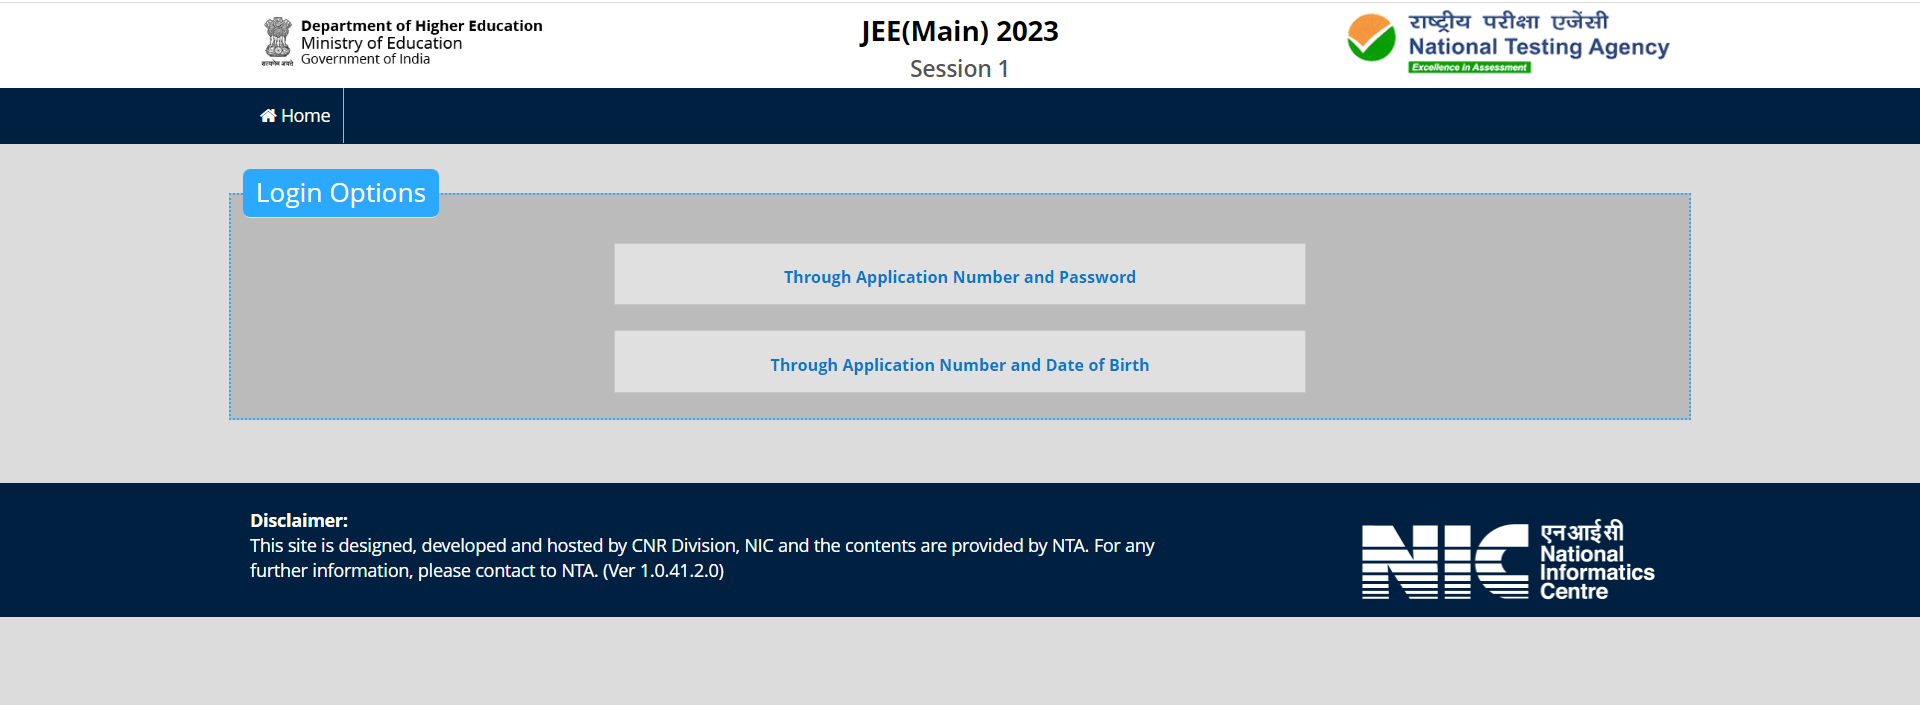 jee main 2023 answer key, jee main 2023 session 1 answer key, jeemain.nta.nic.in, jee main answer key download, jee mains response sheet, jee mains response sheet 2023 release date